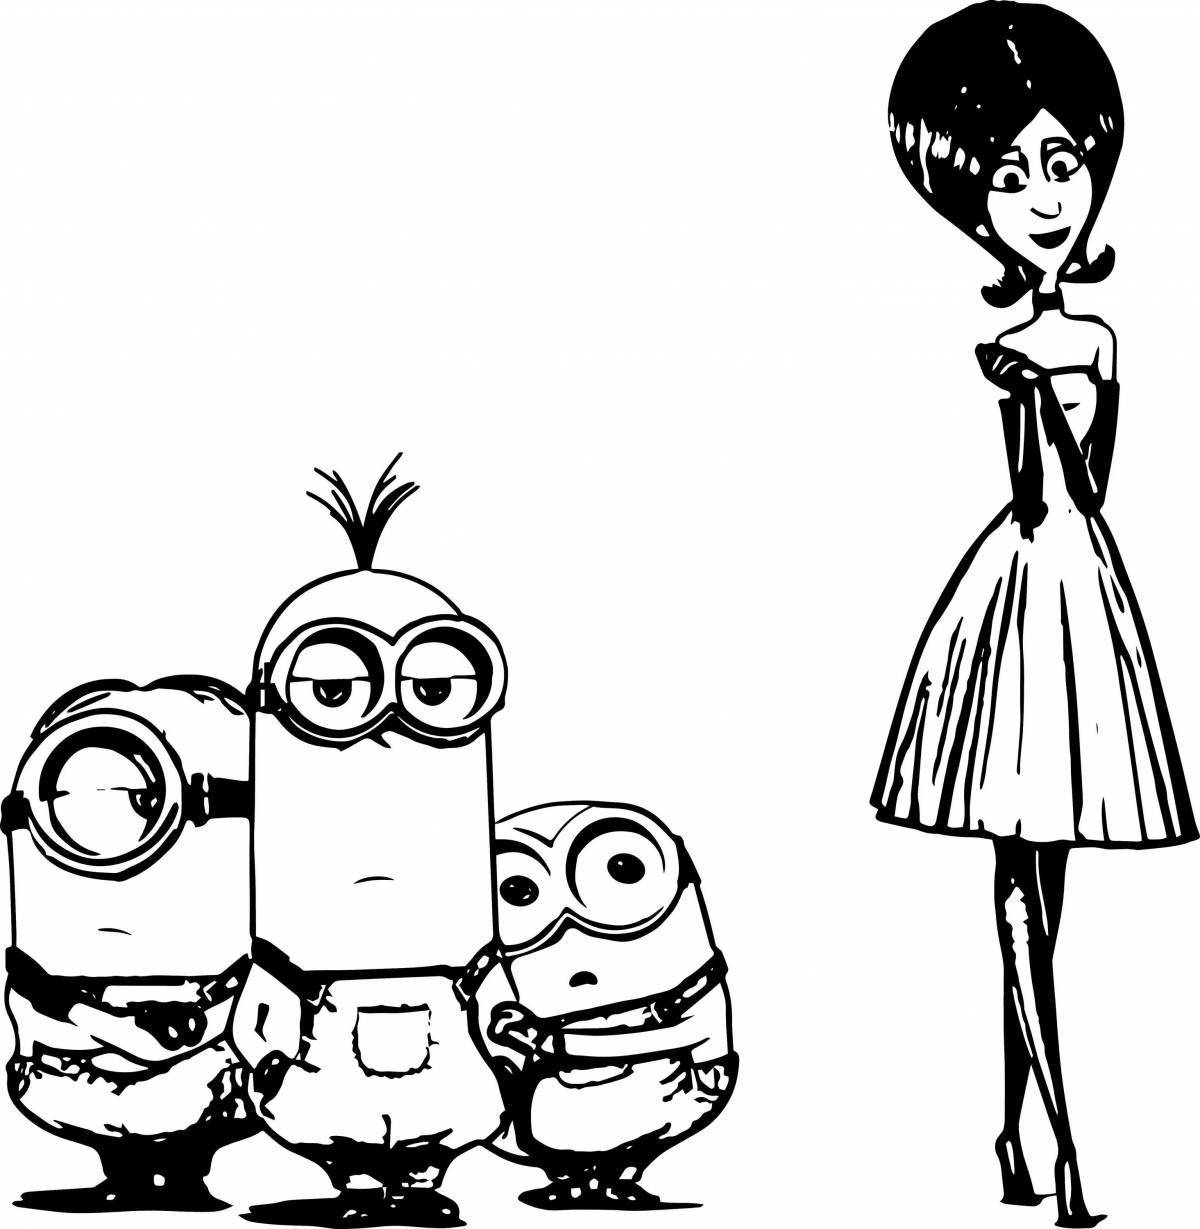 Colour-maddened despicable me minions coloring page